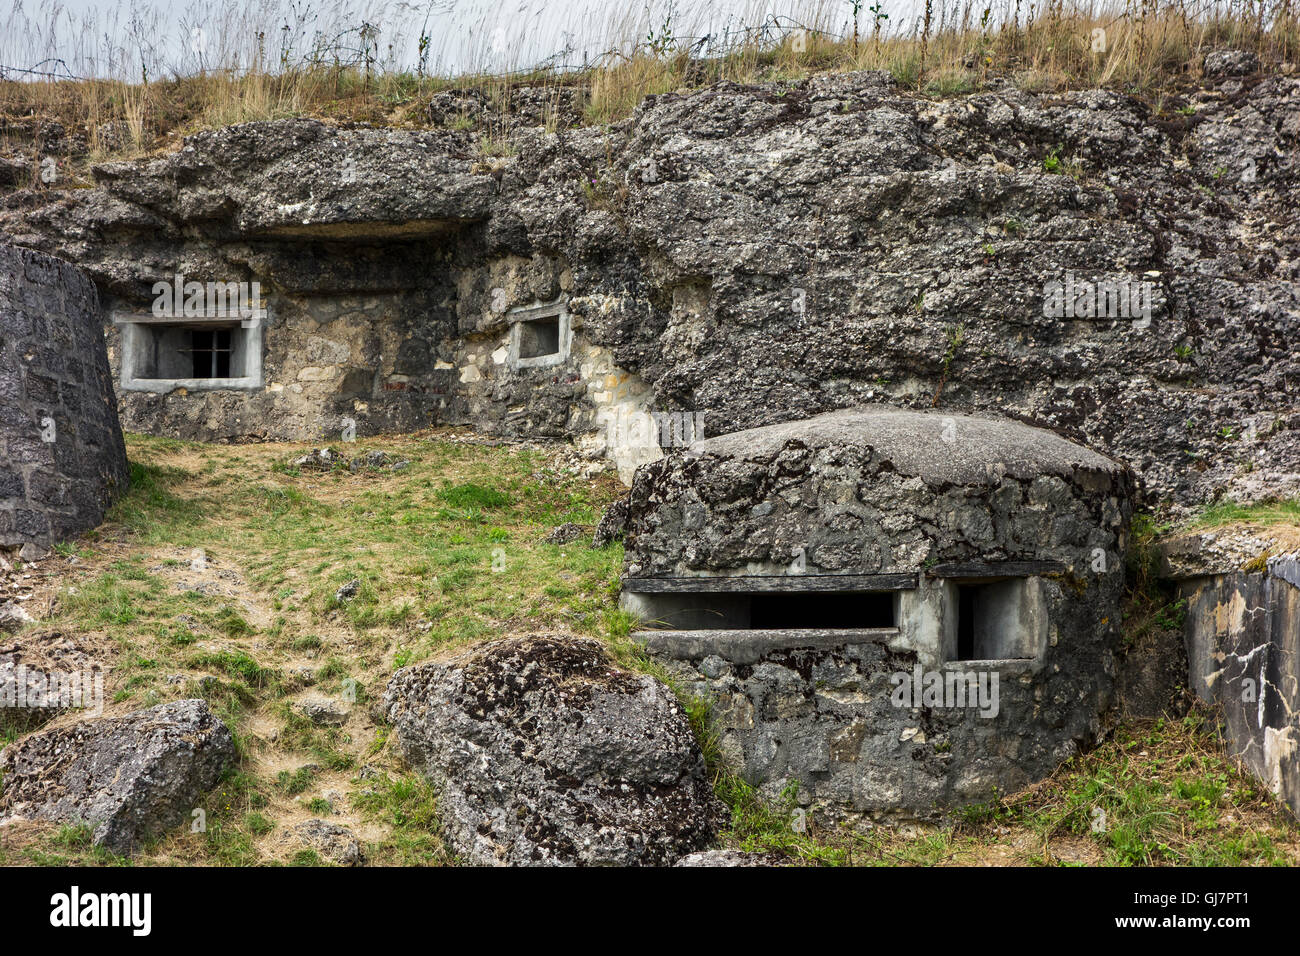 Loopholes / embrasures in the First World War One Fort de Douaumont, Lorraine, Battle of Verdun, France Stock Photo